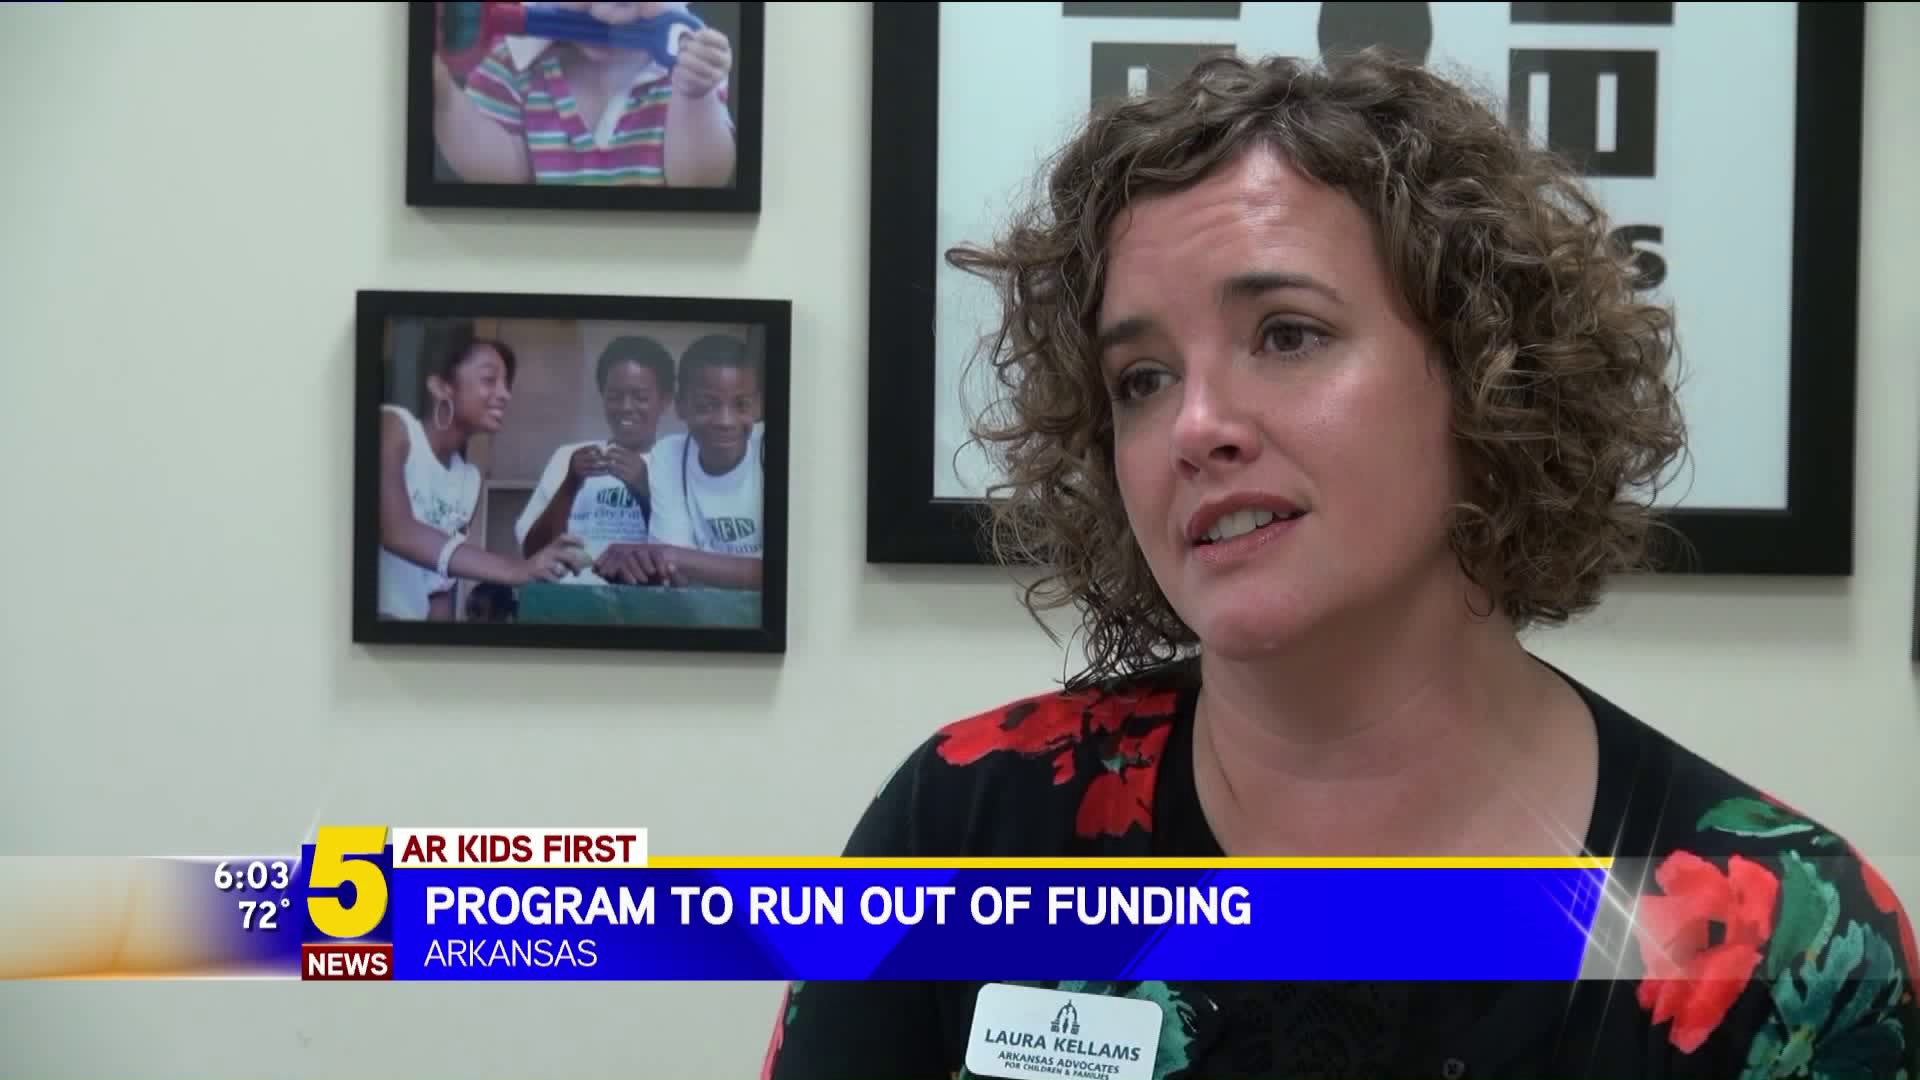 Program To Run Out Of Funding